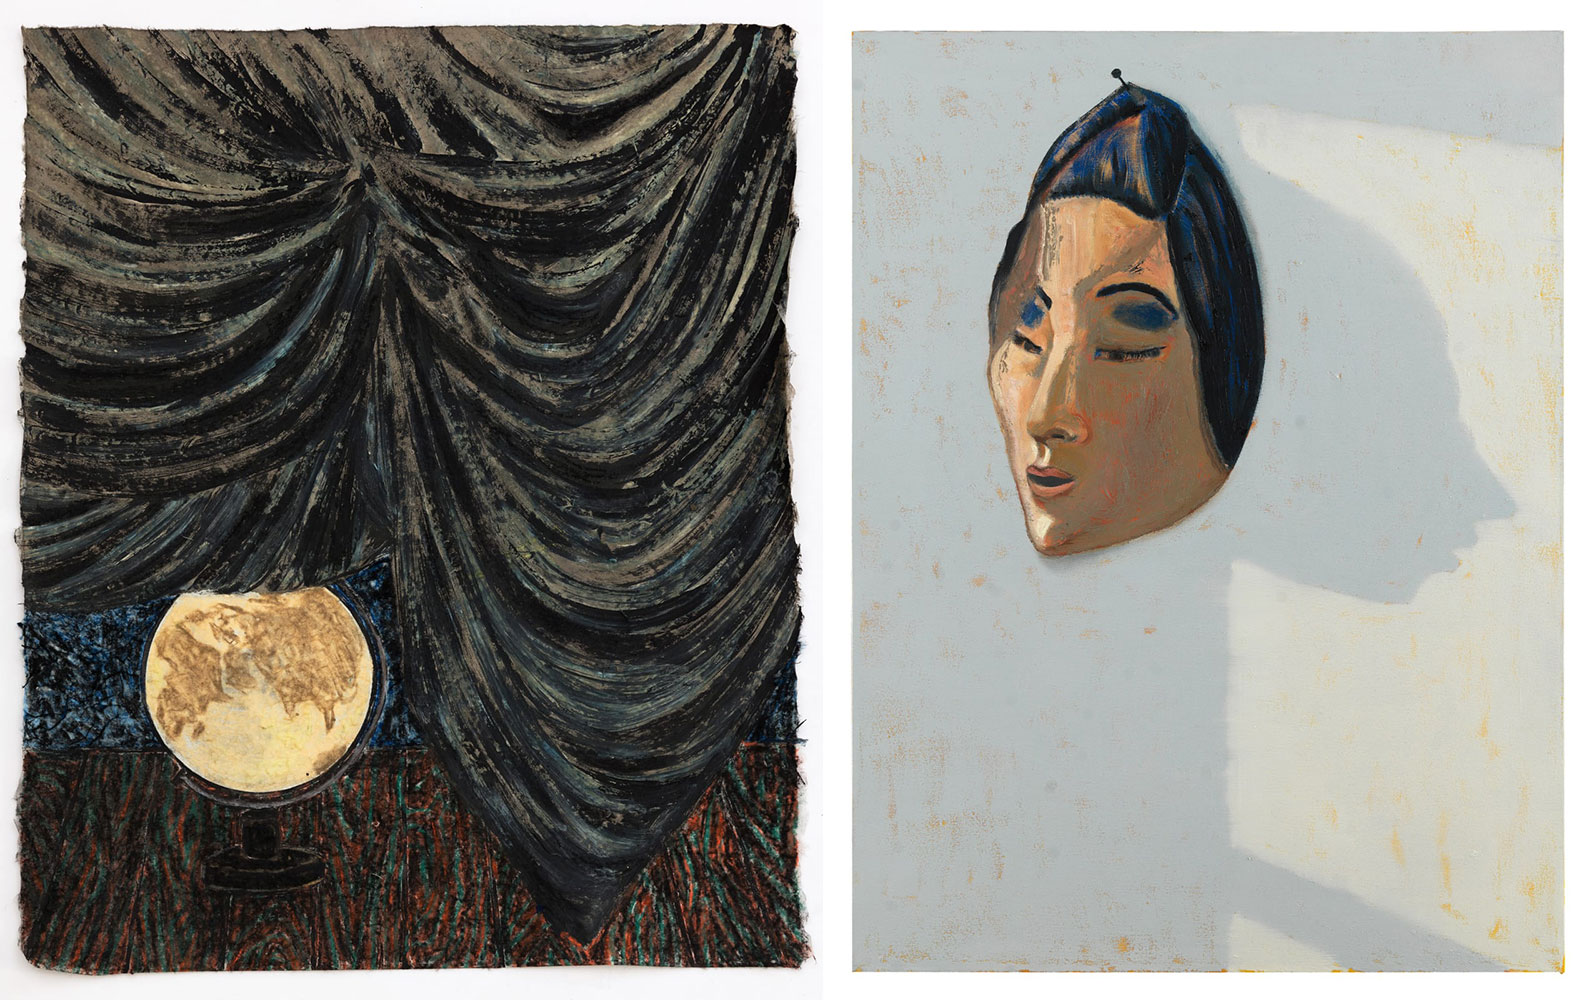 Left: Mamma Andersson, Jordgloben / The Globe, 2022, Soft pastel and acrylic on rice paper, 52x43 cm, © Mamma Andersson, Courtesy the artist and Galleri Magnus KarlssonRight: Mamma Andersson, Modern / The Mother, 2021, Oil and acrylic on canvas, 105x80 cm, © Mamma Andersson, Courtesy the artist and Galleri Magnus Karlsson 